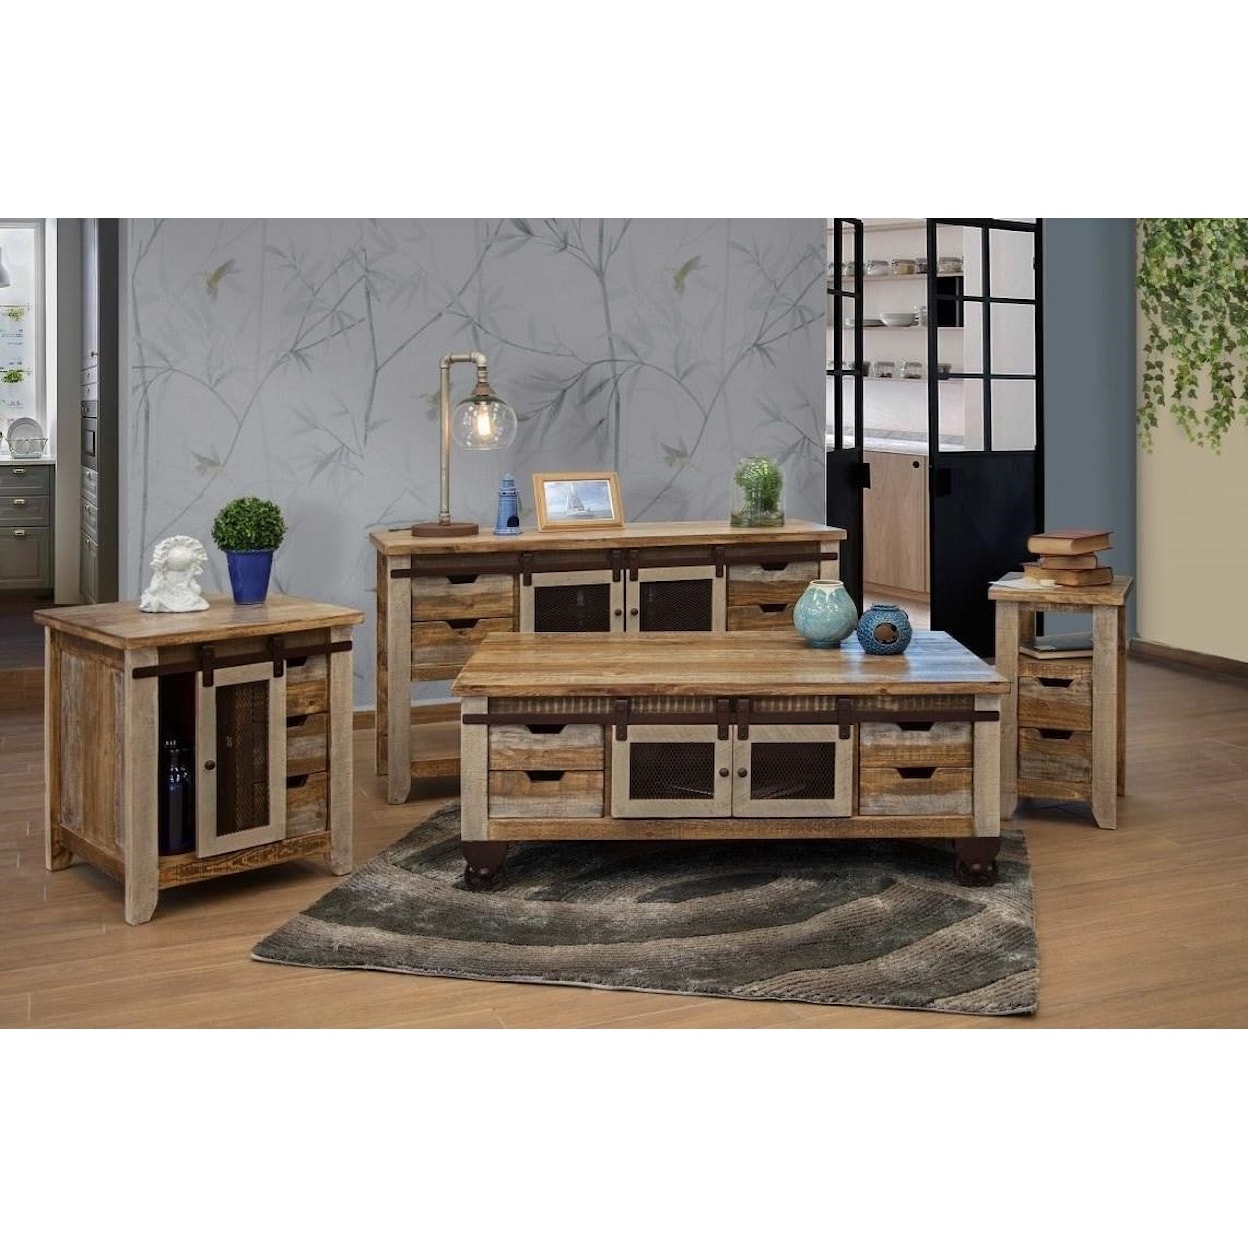 IFD International Furniture Direct 900 Antique Sofa Table with 2 Doors and 4 Drawers